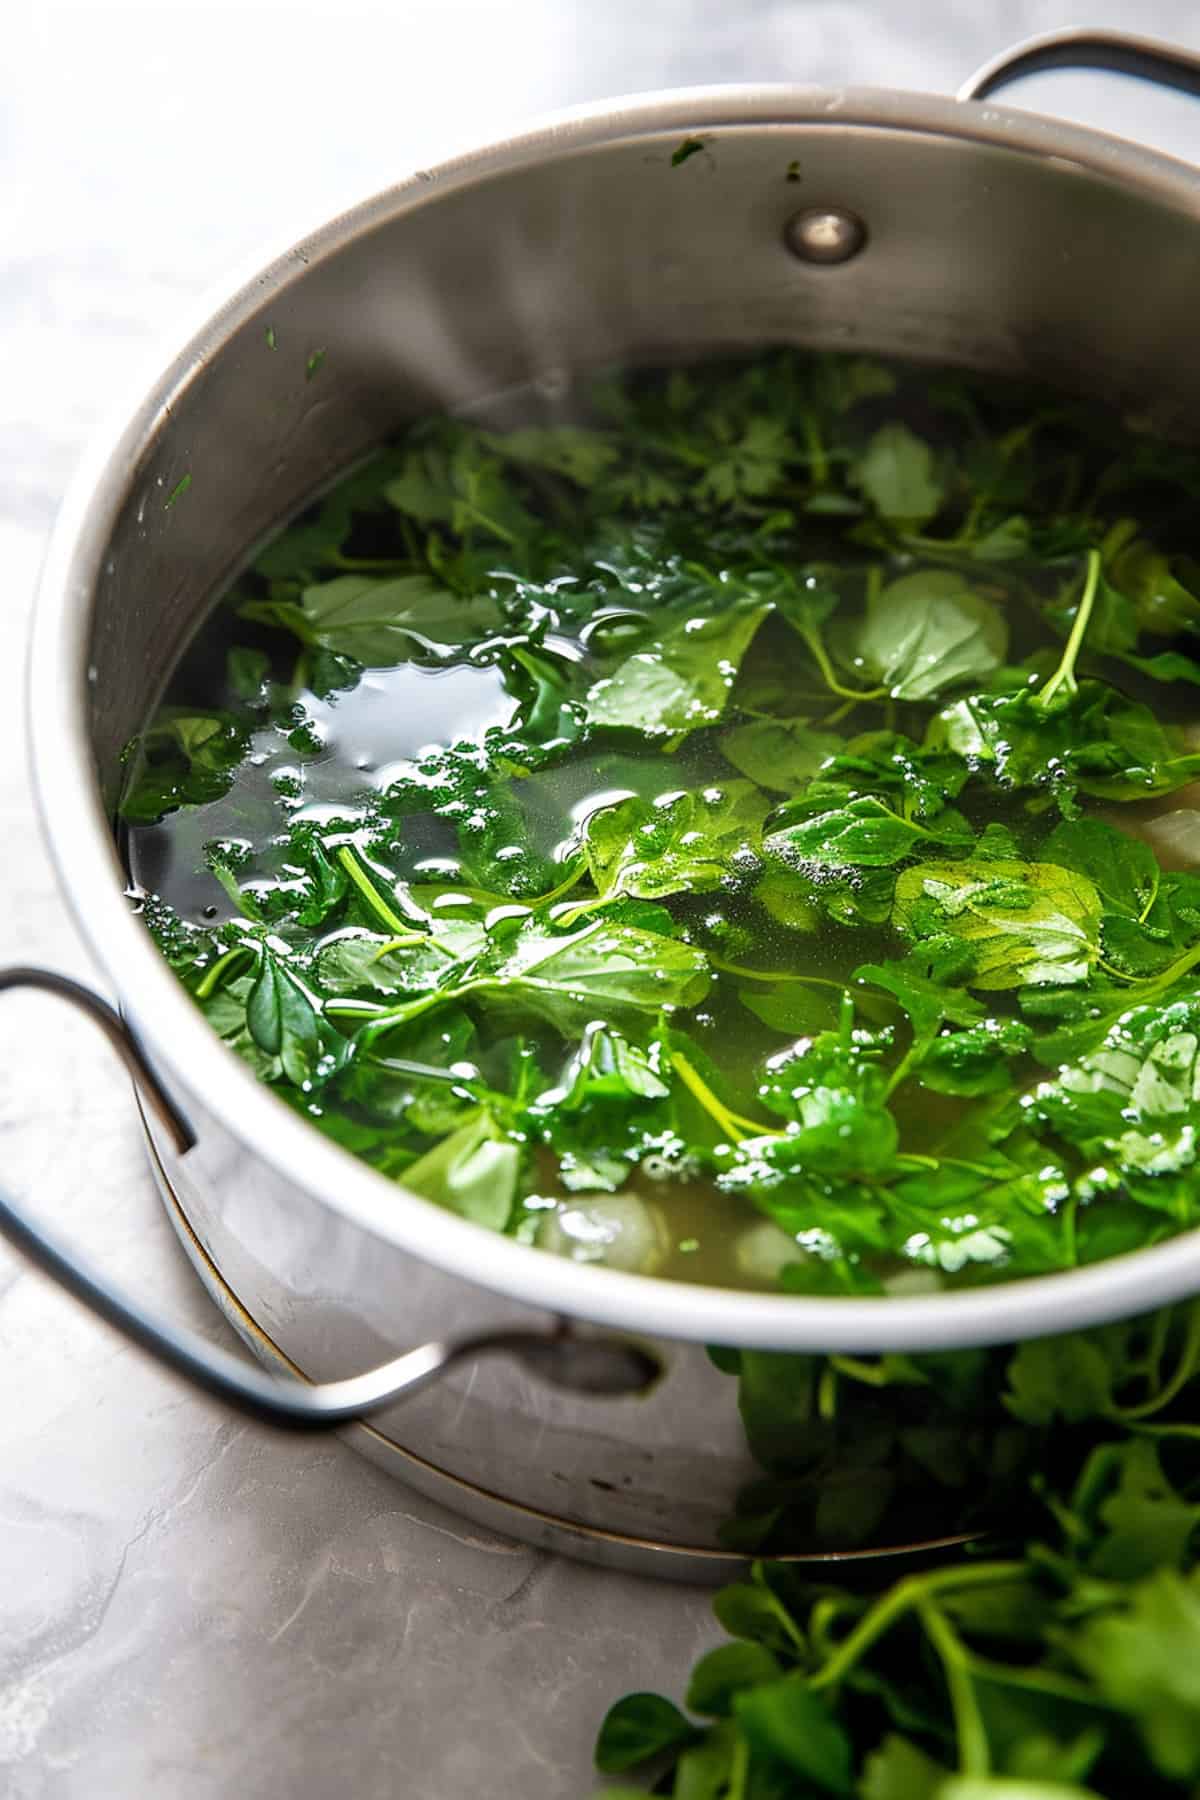 Watercress soup being cooked in a pan on the stove.